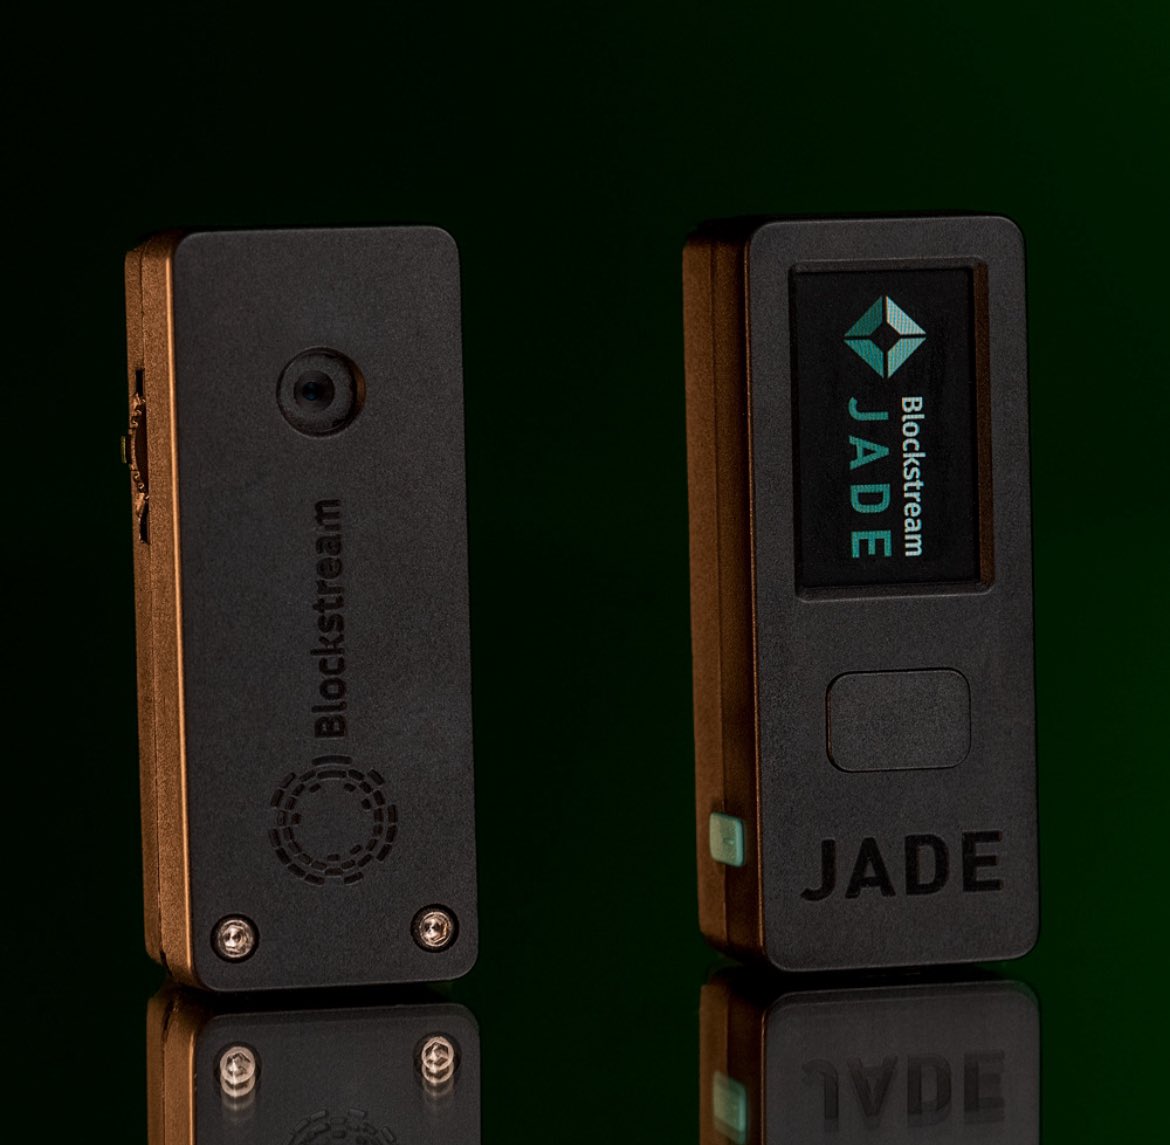 Get your coins off exchange to self-custody!

Hardwarewallet #Blockstream 
              #Jade 

  Coupon code: JOKHODL

-10% discount on all store hardware wallet and  metal backup

store.blockstream.com/jokhodl

#Hardwarewallet ⚡️

#Bitcoin…